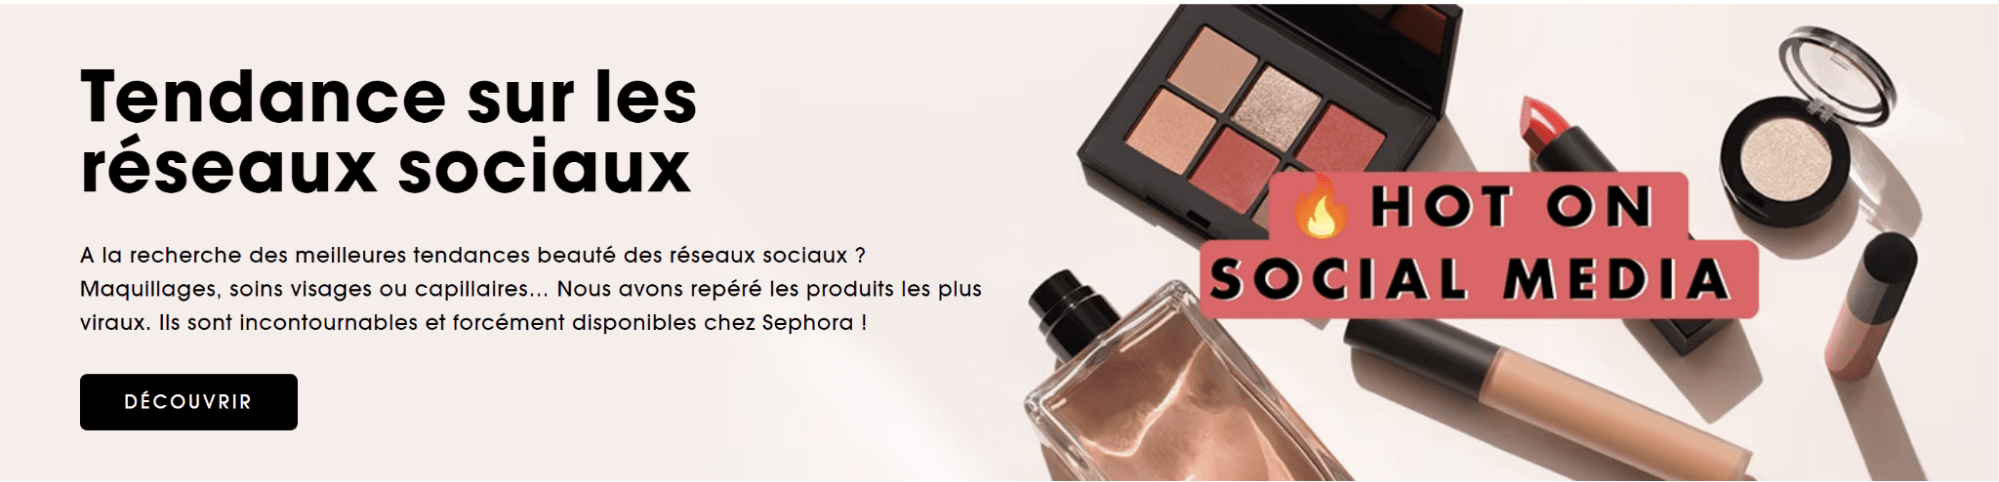 Sephora French hero banner with a “hot on social media” tag that few French speakers would understand.